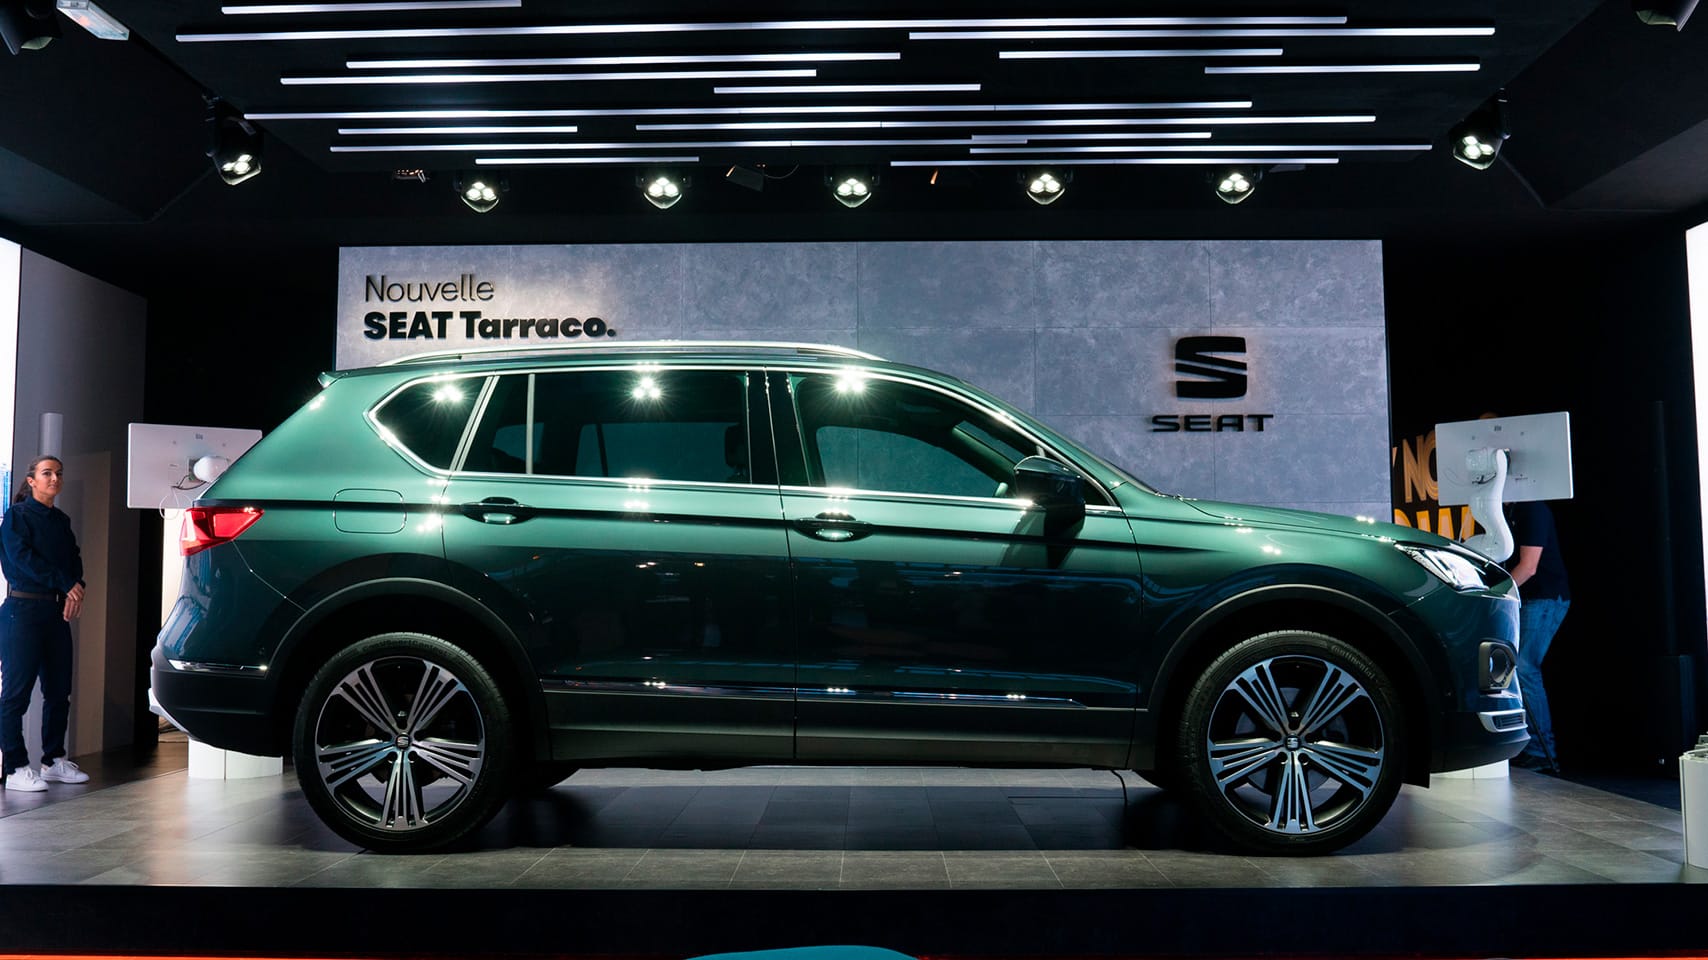 New SEAT Tarraco side view